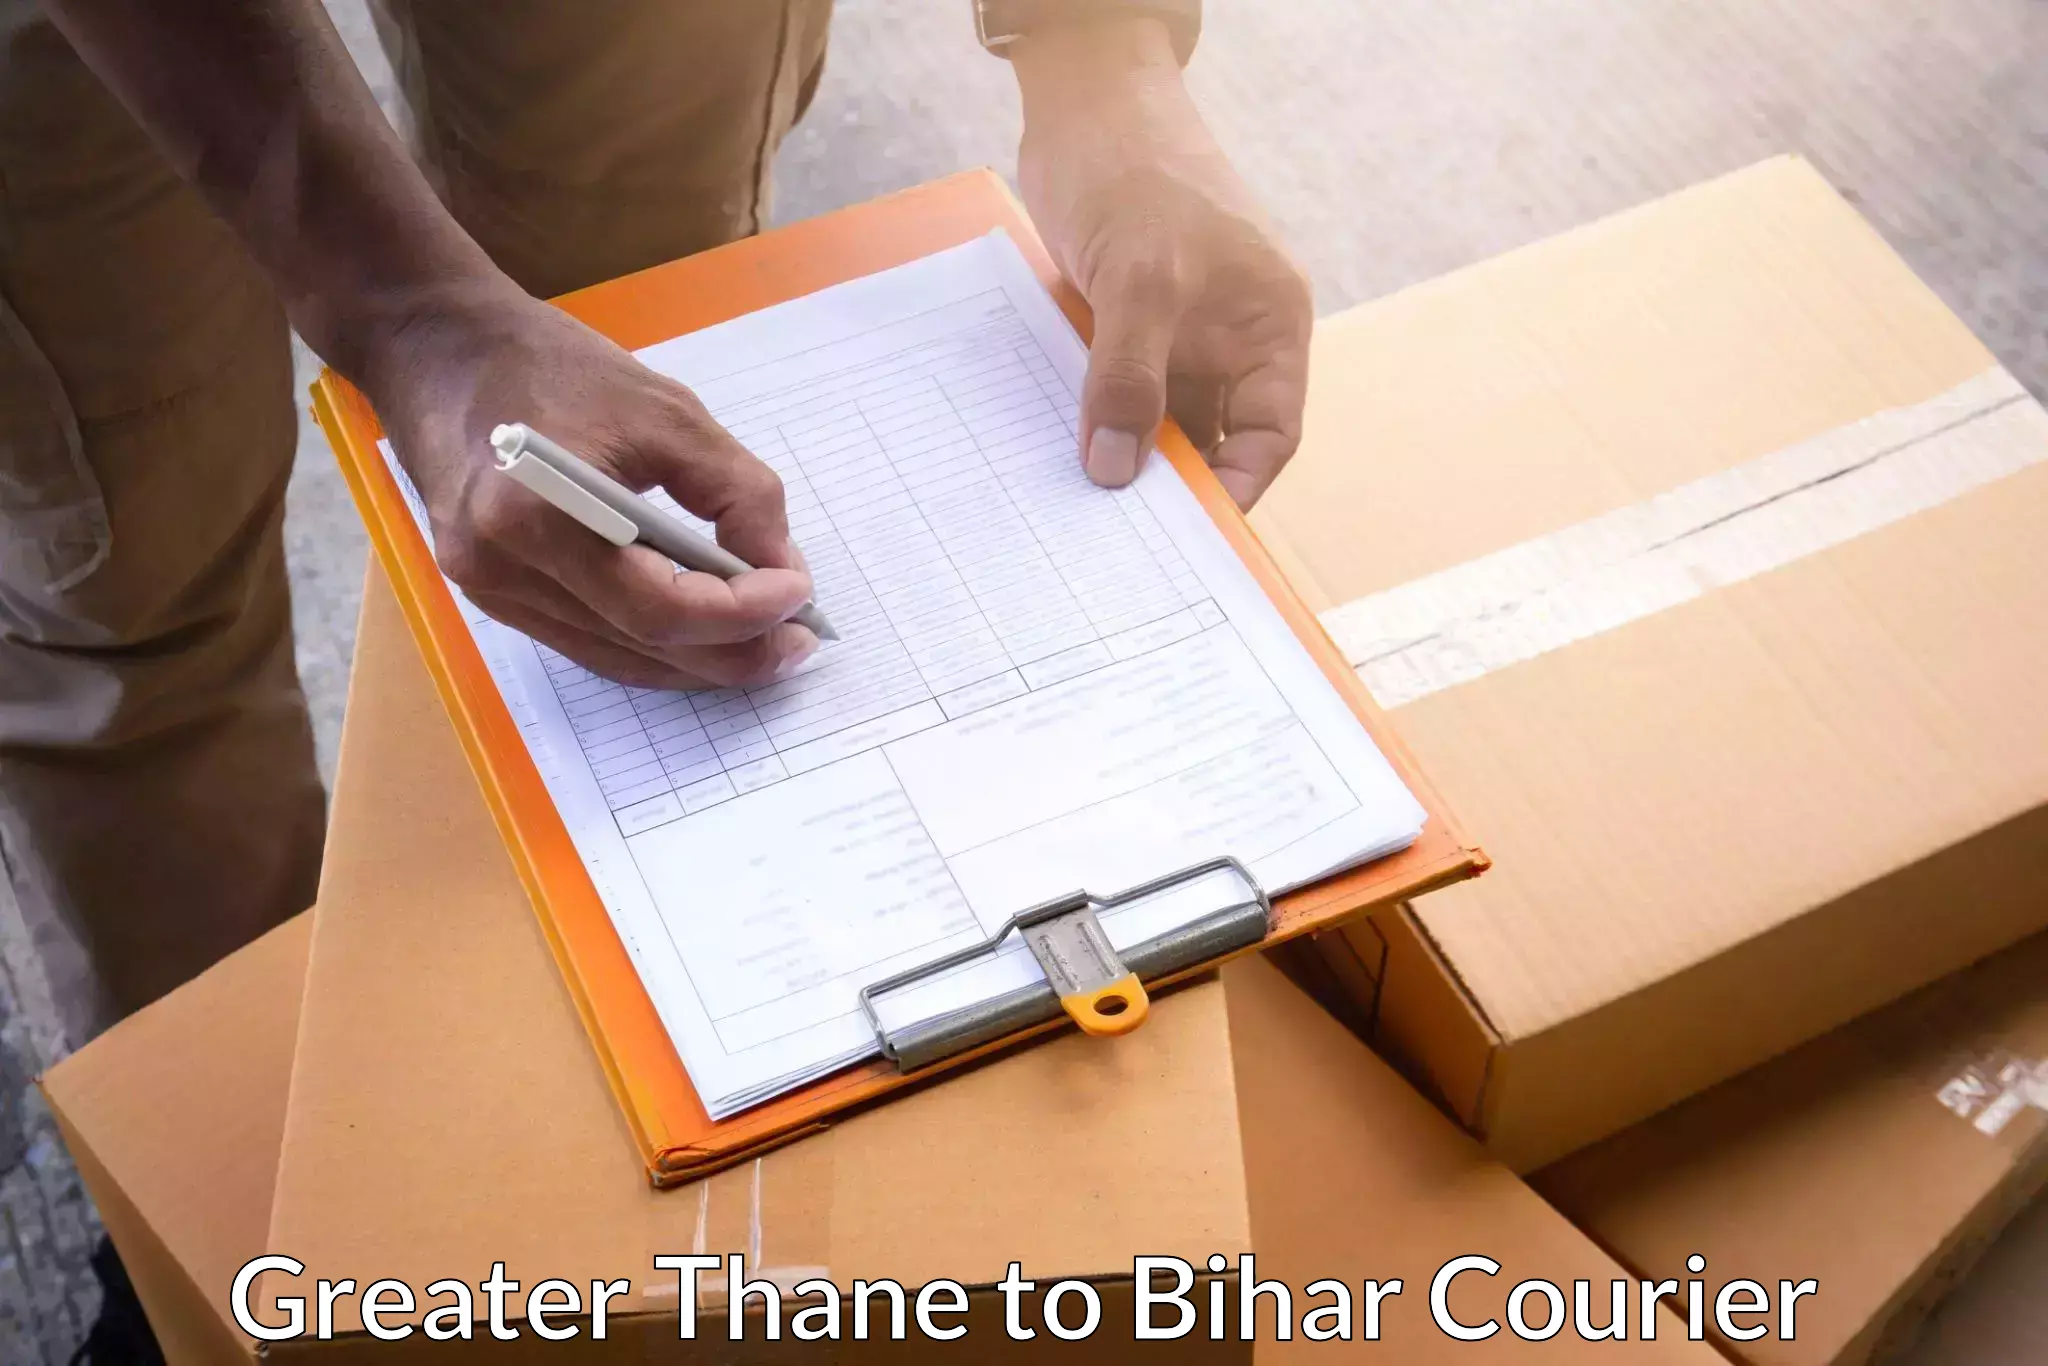 24-hour courier service Greater Thane to Jagdishpur Bhojpur